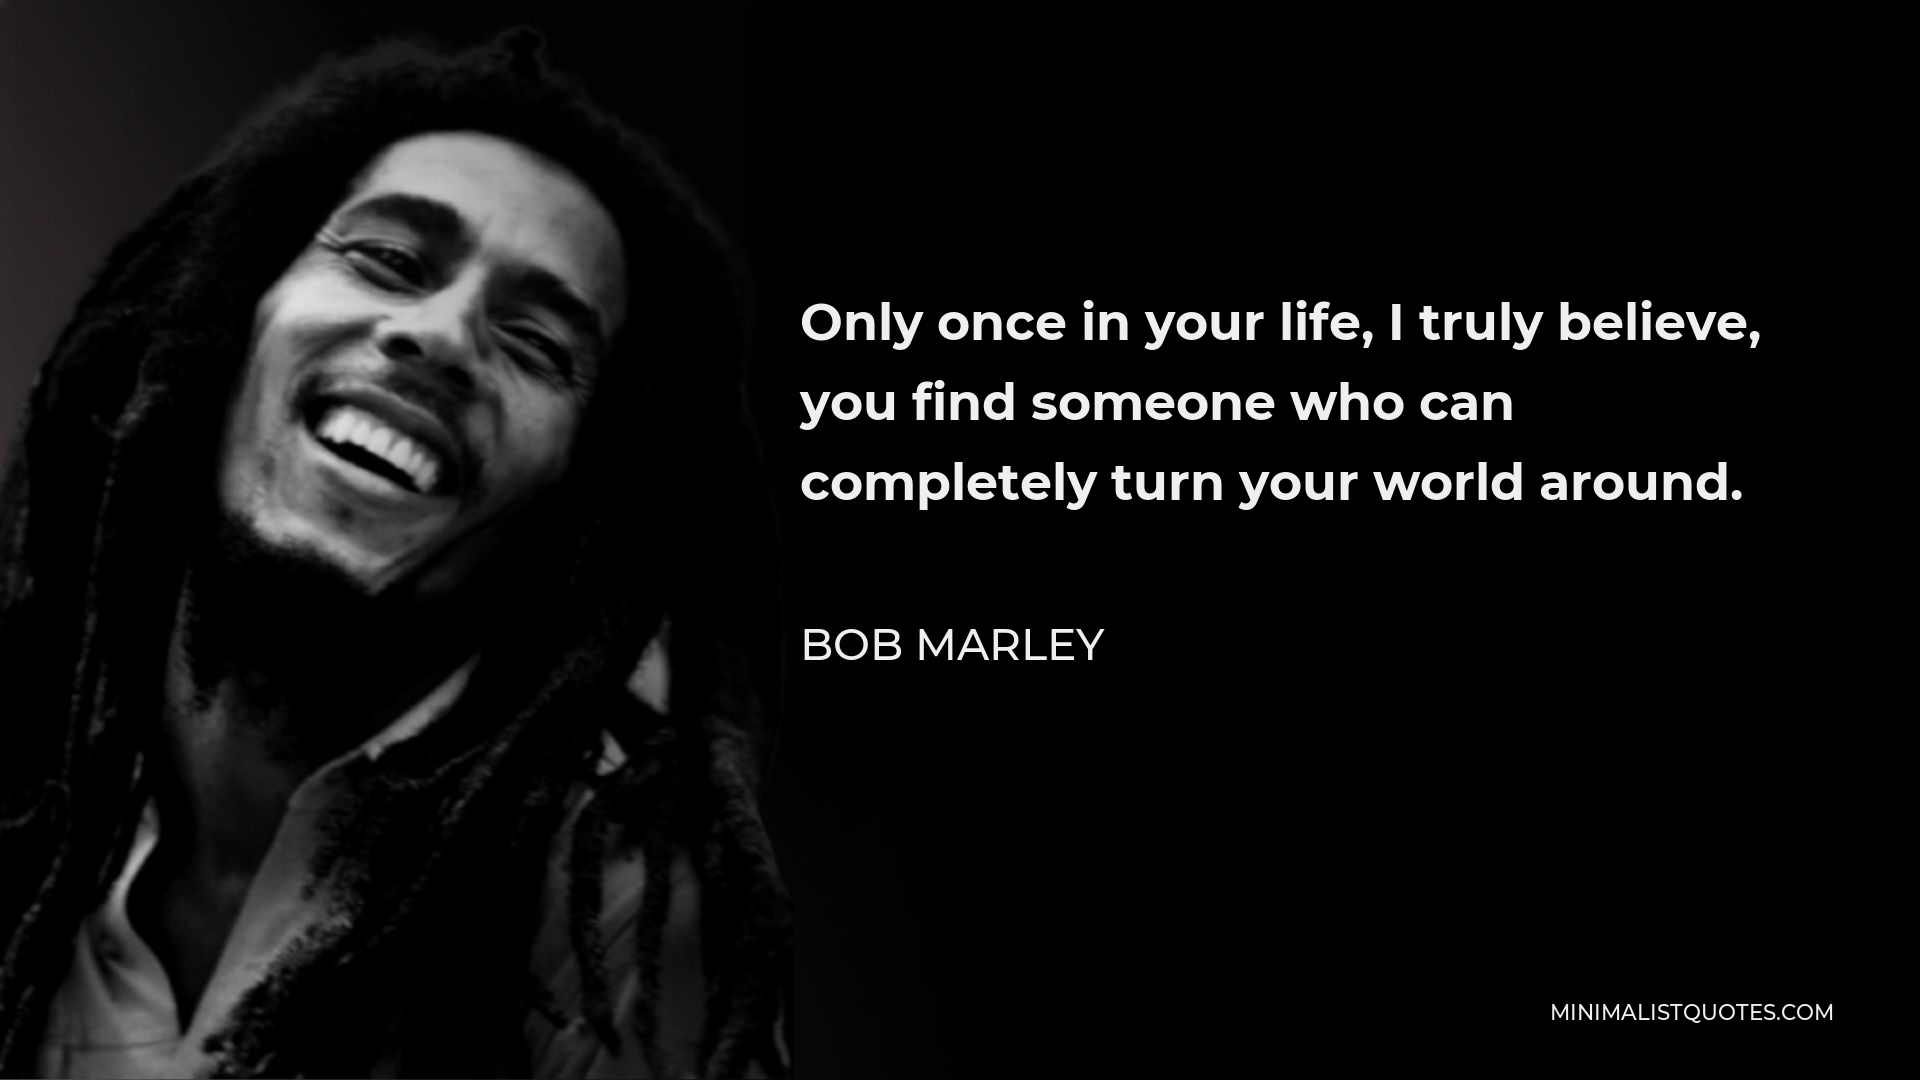 Bob Marley Quote - Only once in your life, I truly believe, you find someone who can completely turn your world around.